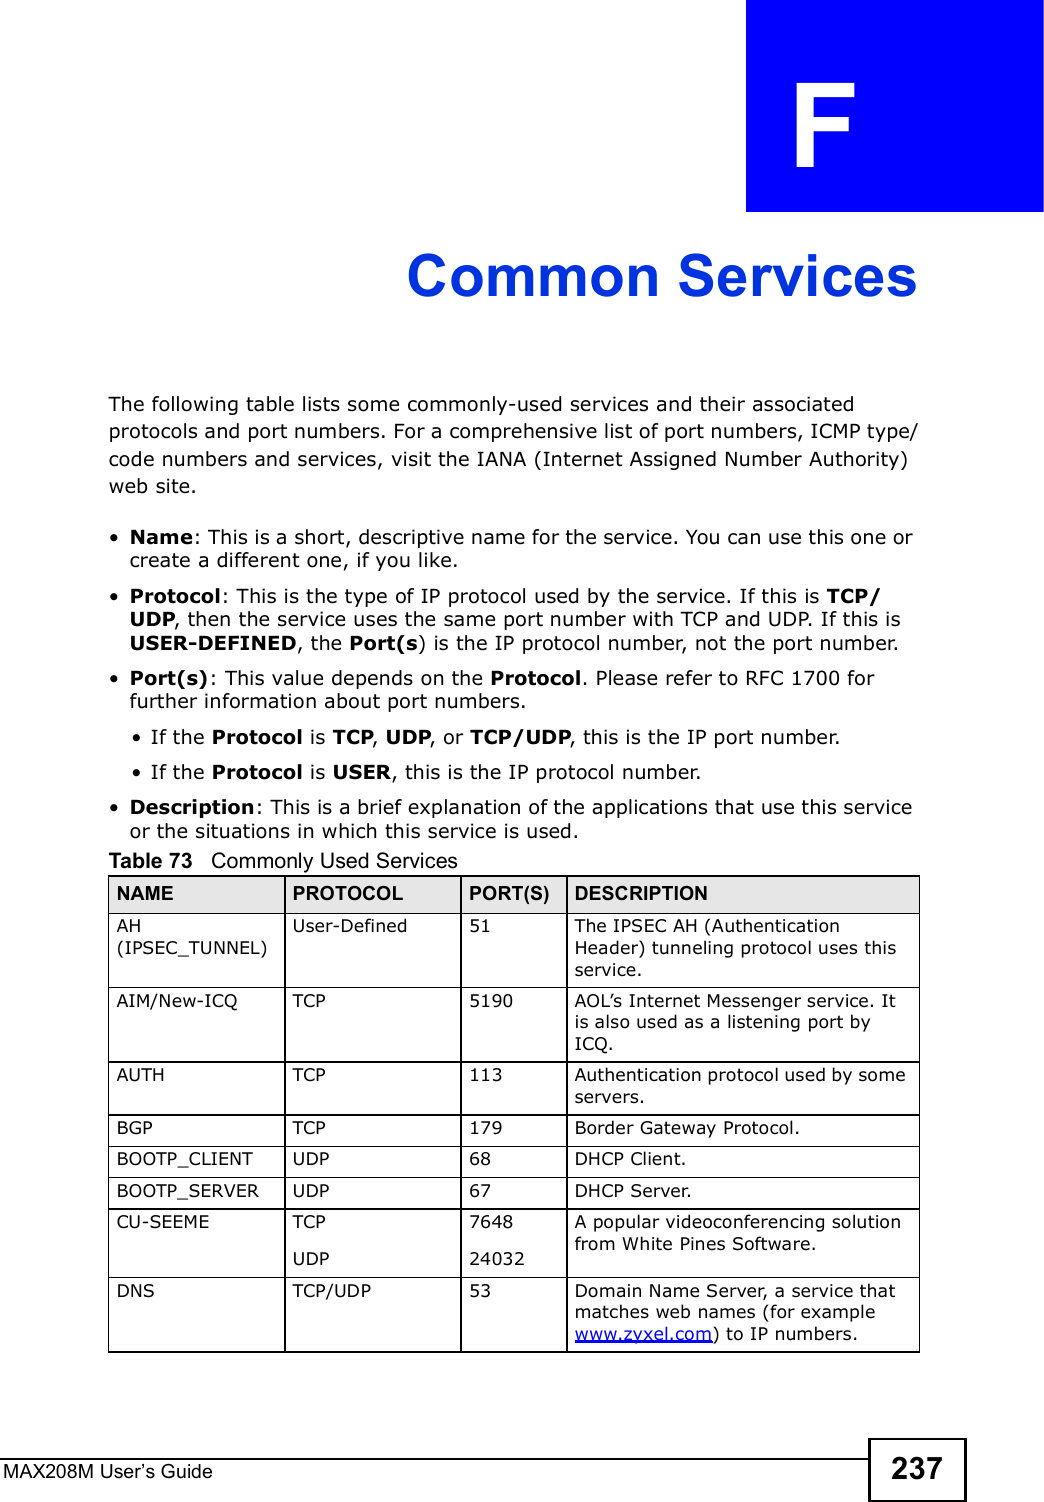 MAX208M User s Guide 237APPENDIX  F Common ServicesThe following table lists some commonly-used services and their associated protocols and port numbers. For a comprehensive list of port numbers, ICMP type/code numbers and services, visit the IANA (Internet Assigned Number Authority) web site. !Name: This is a short, descriptive name for the service. You can use this one or create a different one, if you like.!Protocol: This is the type of IP protocol used by the service. If this is TCP/UDP, then the service uses the same port number with TCP and UDP. If this is USER-DEFINED, the Port(s) is the IP protocol number, not the port number.!Port(s): This value depends on the Protocol. Please refer to RFC 1700 for further information about port numbers.!If the Protocol is TCP, UDP, or TCP/UDP, this is the IP port number.!If the Protocol is USER, this is the IP protocol number.!Description: This is a brief explanation of the applications that use this service or the situations in which this service is used.Table 73   Commonly Used ServicesNAME PROTOCOL PORT(S) DESCRIPTIONAH (IPSEC_TUNNEL)User-Defined 51 The IPSEC AH (Authentication Header) tunneling protocol uses this service.AIM/New-ICQ TCP 5190 AOL s Internet Messenger service. It is also used as a listening port by ICQ.AUTH TCP 113 Authentication protocol used by some servers.BGP TCP 179 Border Gateway Protocol.BOOTP_CLIENT UDP 68 DHCP Client.BOOTP_SERVER UDP 67 DHCP Server.CU-SEEME TCPUDP764824032A popular videoconferencing solution from White Pines Software.DNS TCP/UDP 53 Domain Name Server, a service that matches web names (for example www.zyxel.com) to IP numbers.